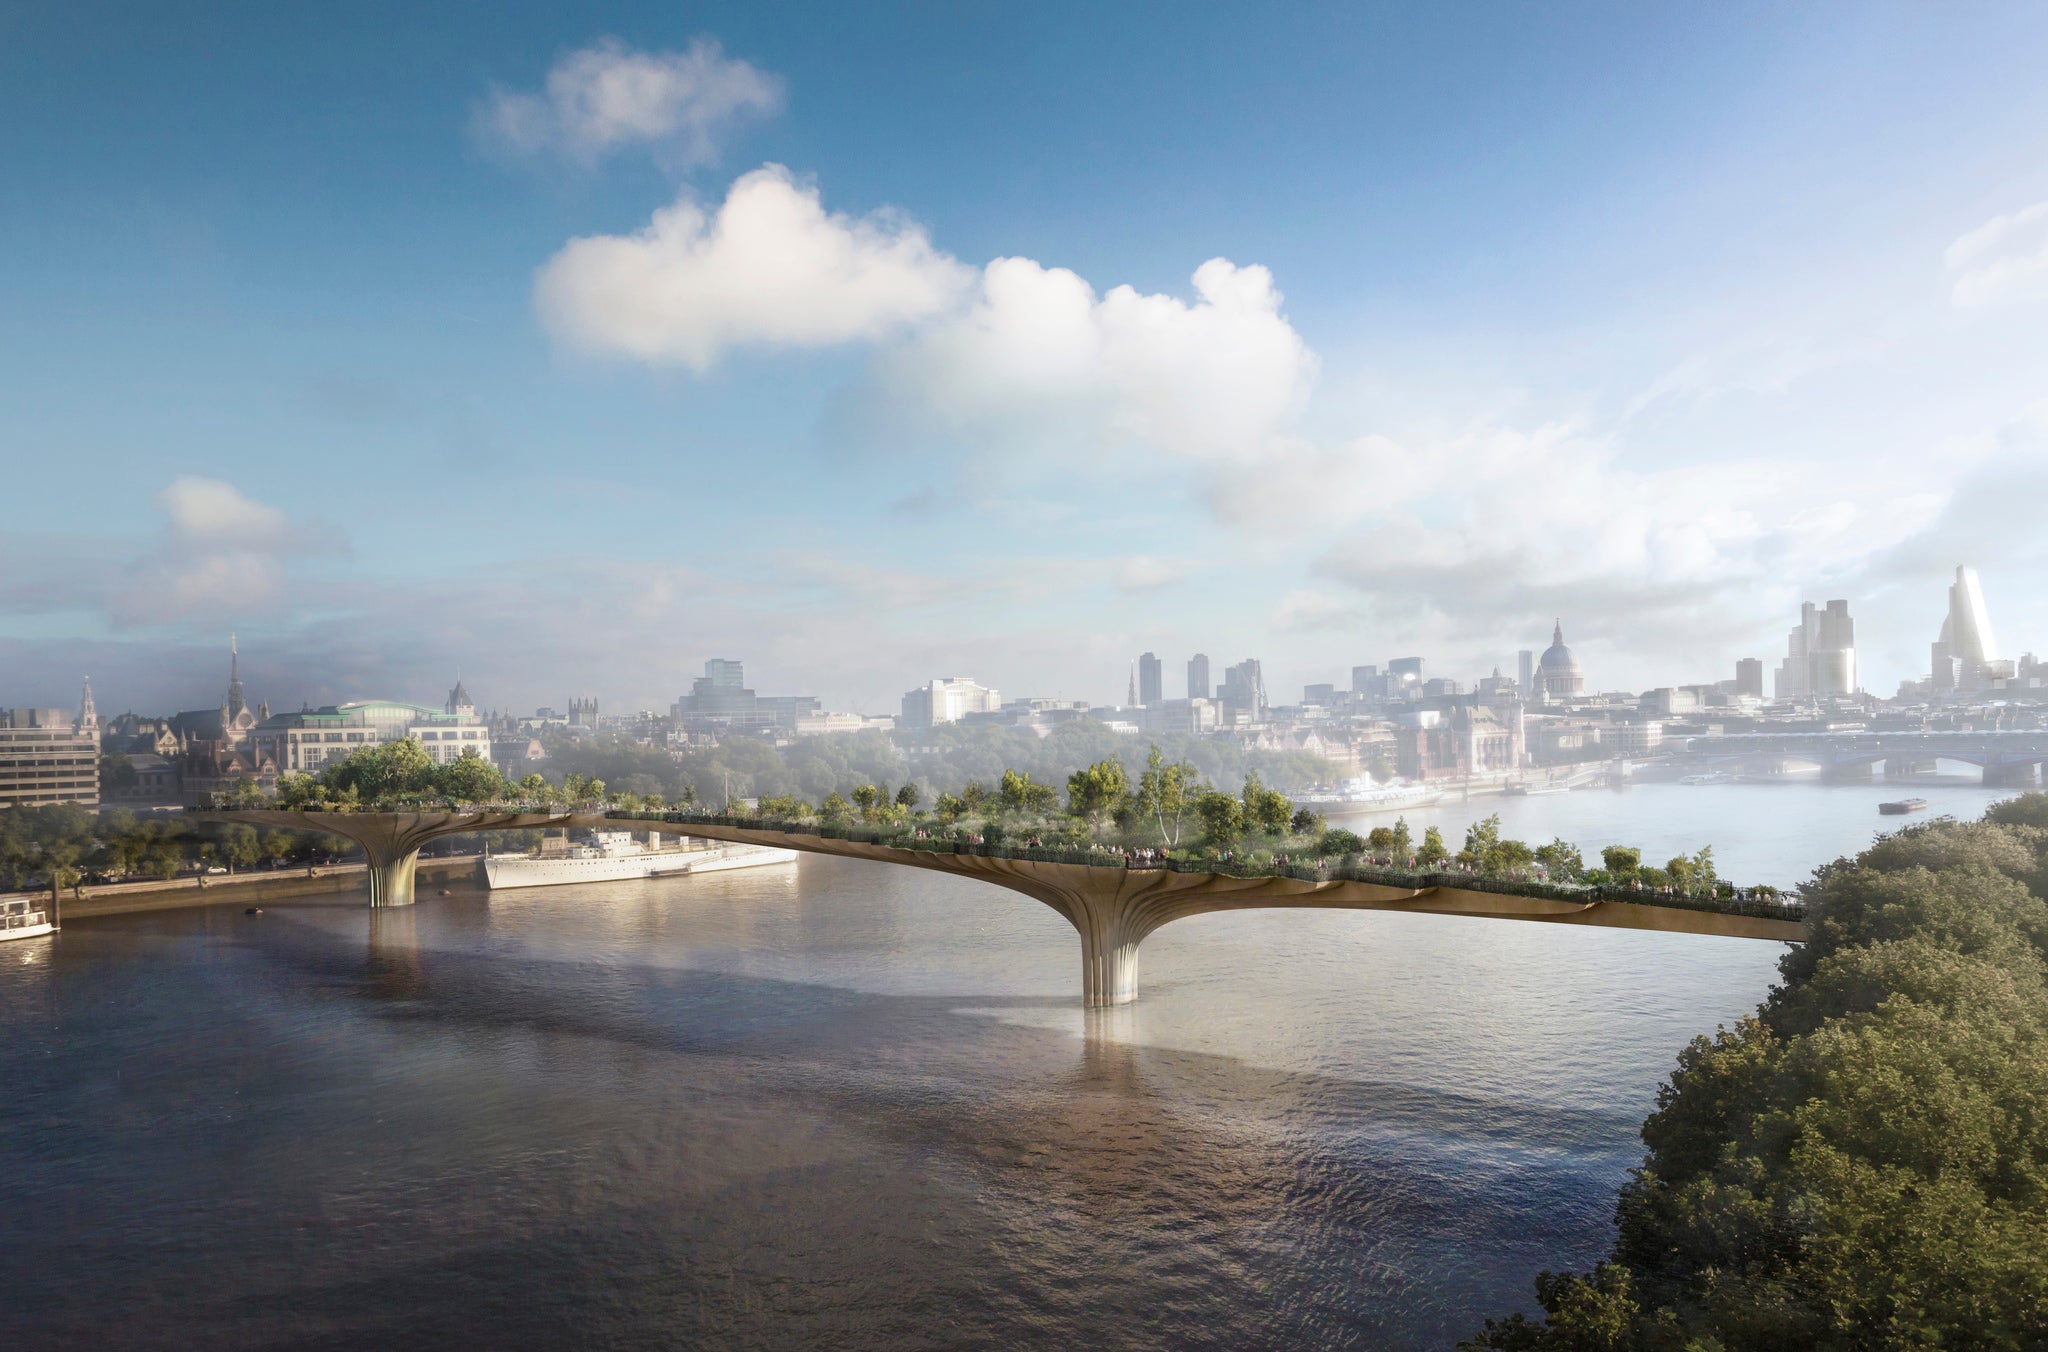 A digital rendering of the planned garden bridge across the River Thames